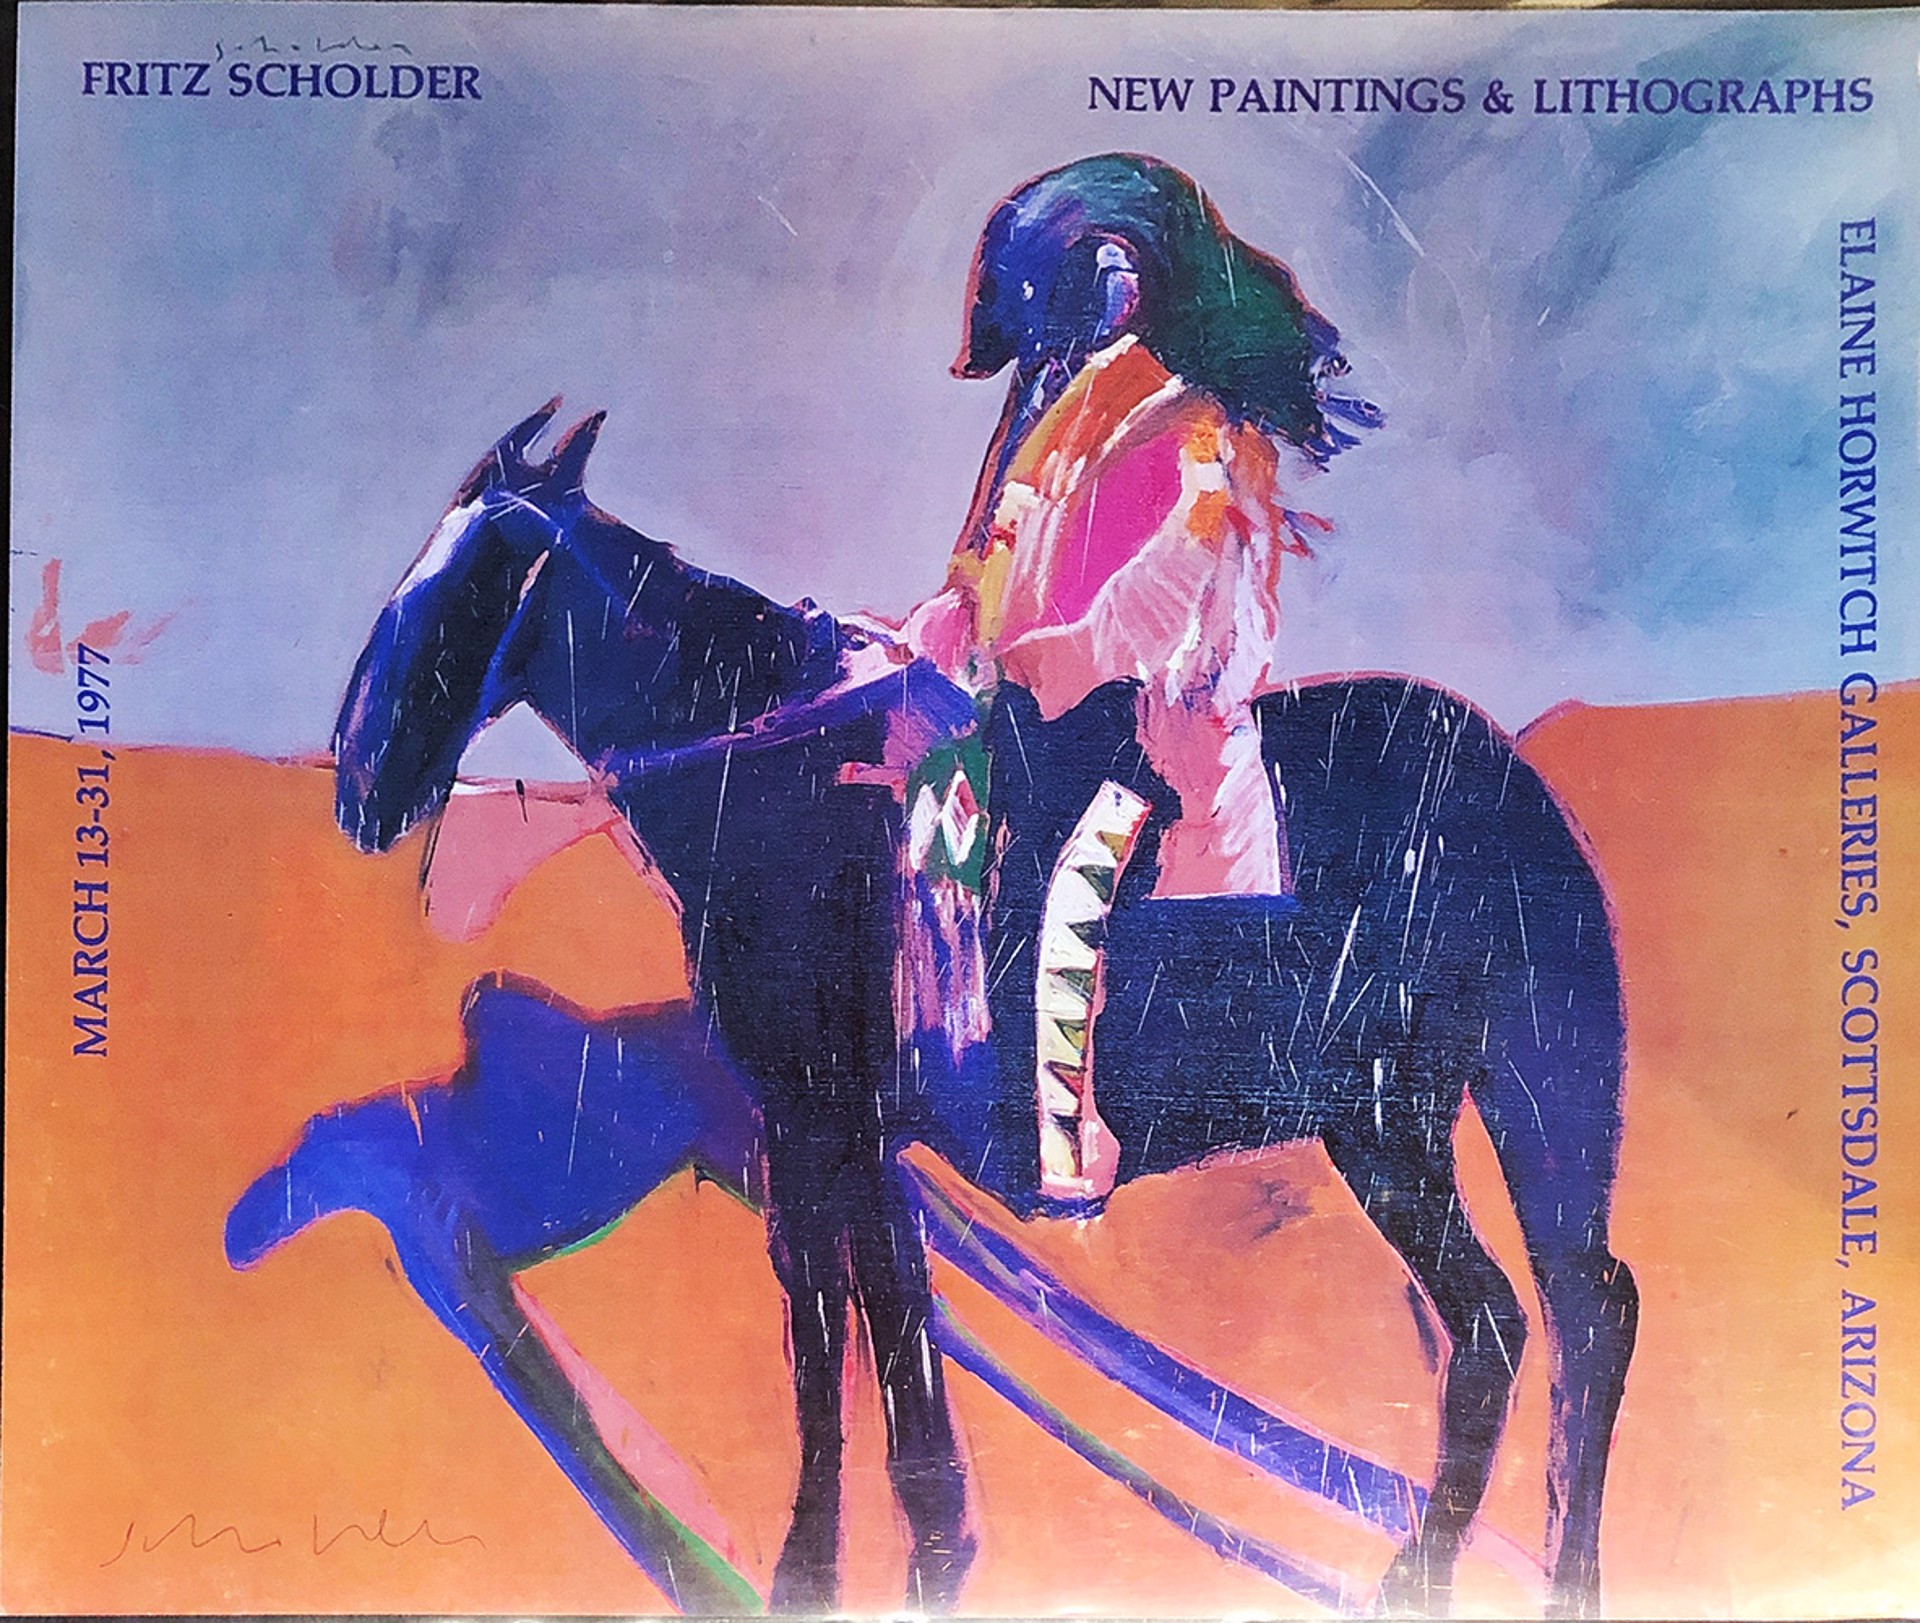 Elaine Horwitch Galleries (New Paintings & Lithographs) by Fritz Scholder